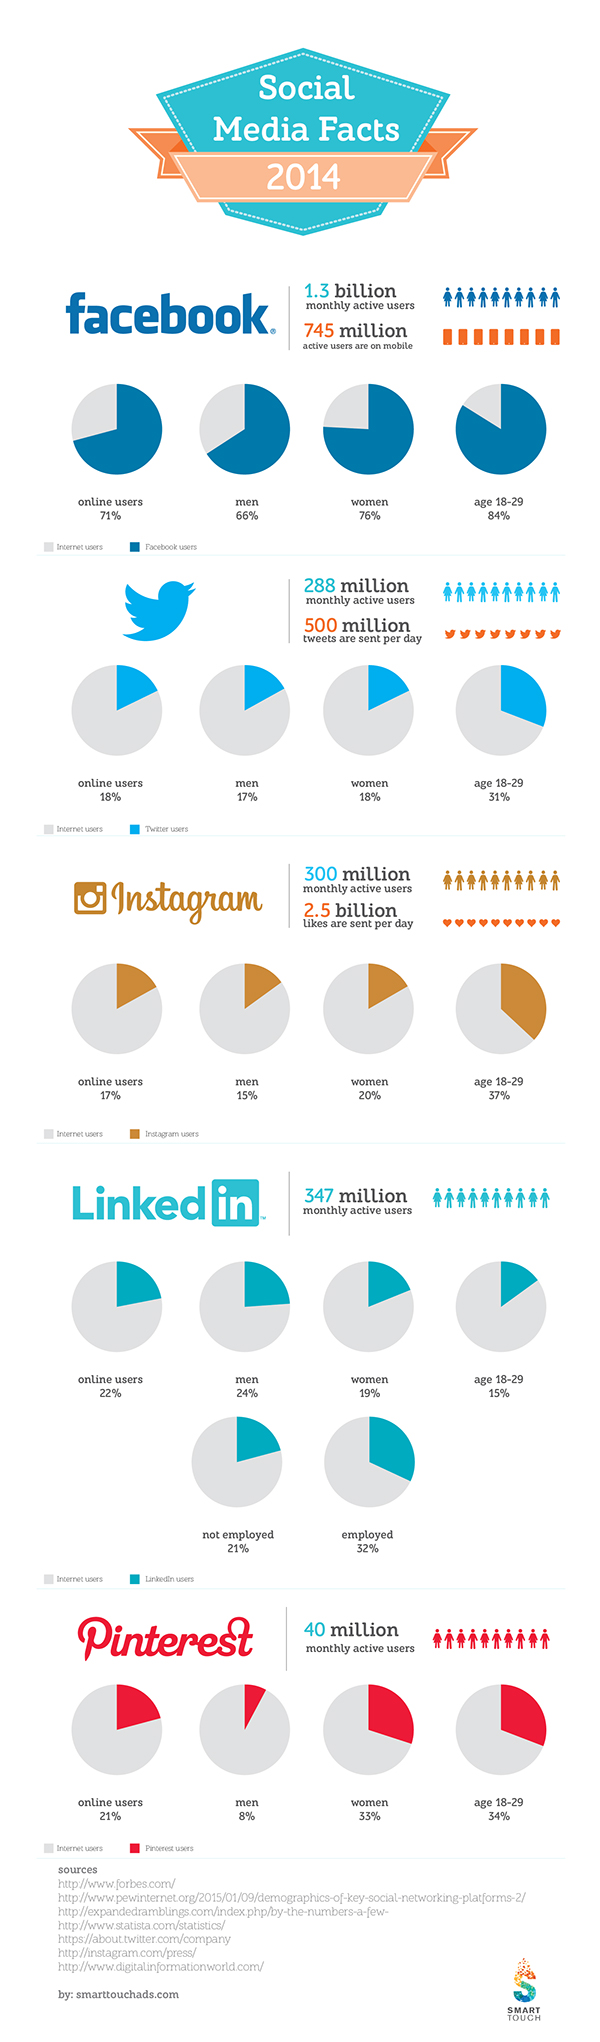 Social Media Facts - InfoGraphic